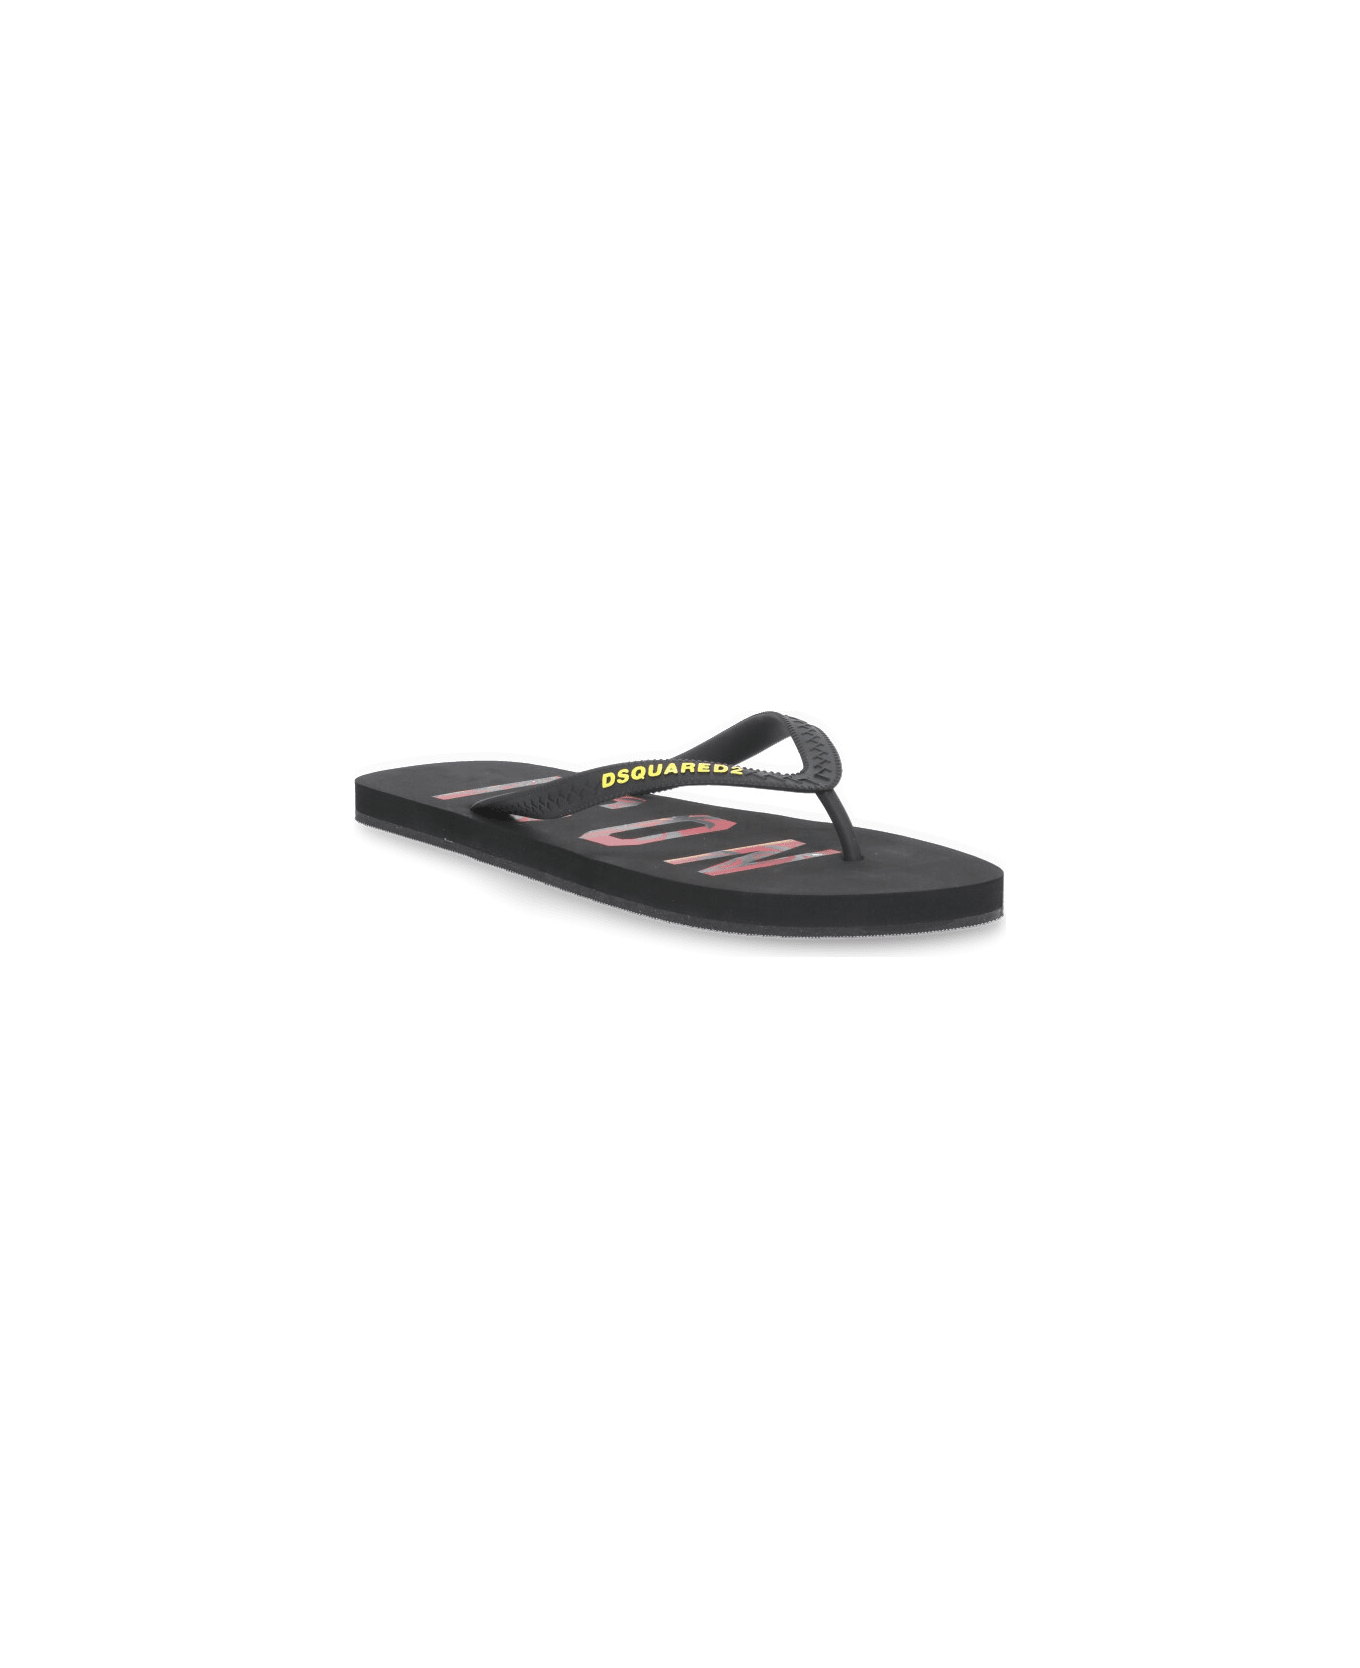 Dsquared2 Rubber Thong Sandal - Black その他各種シューズ